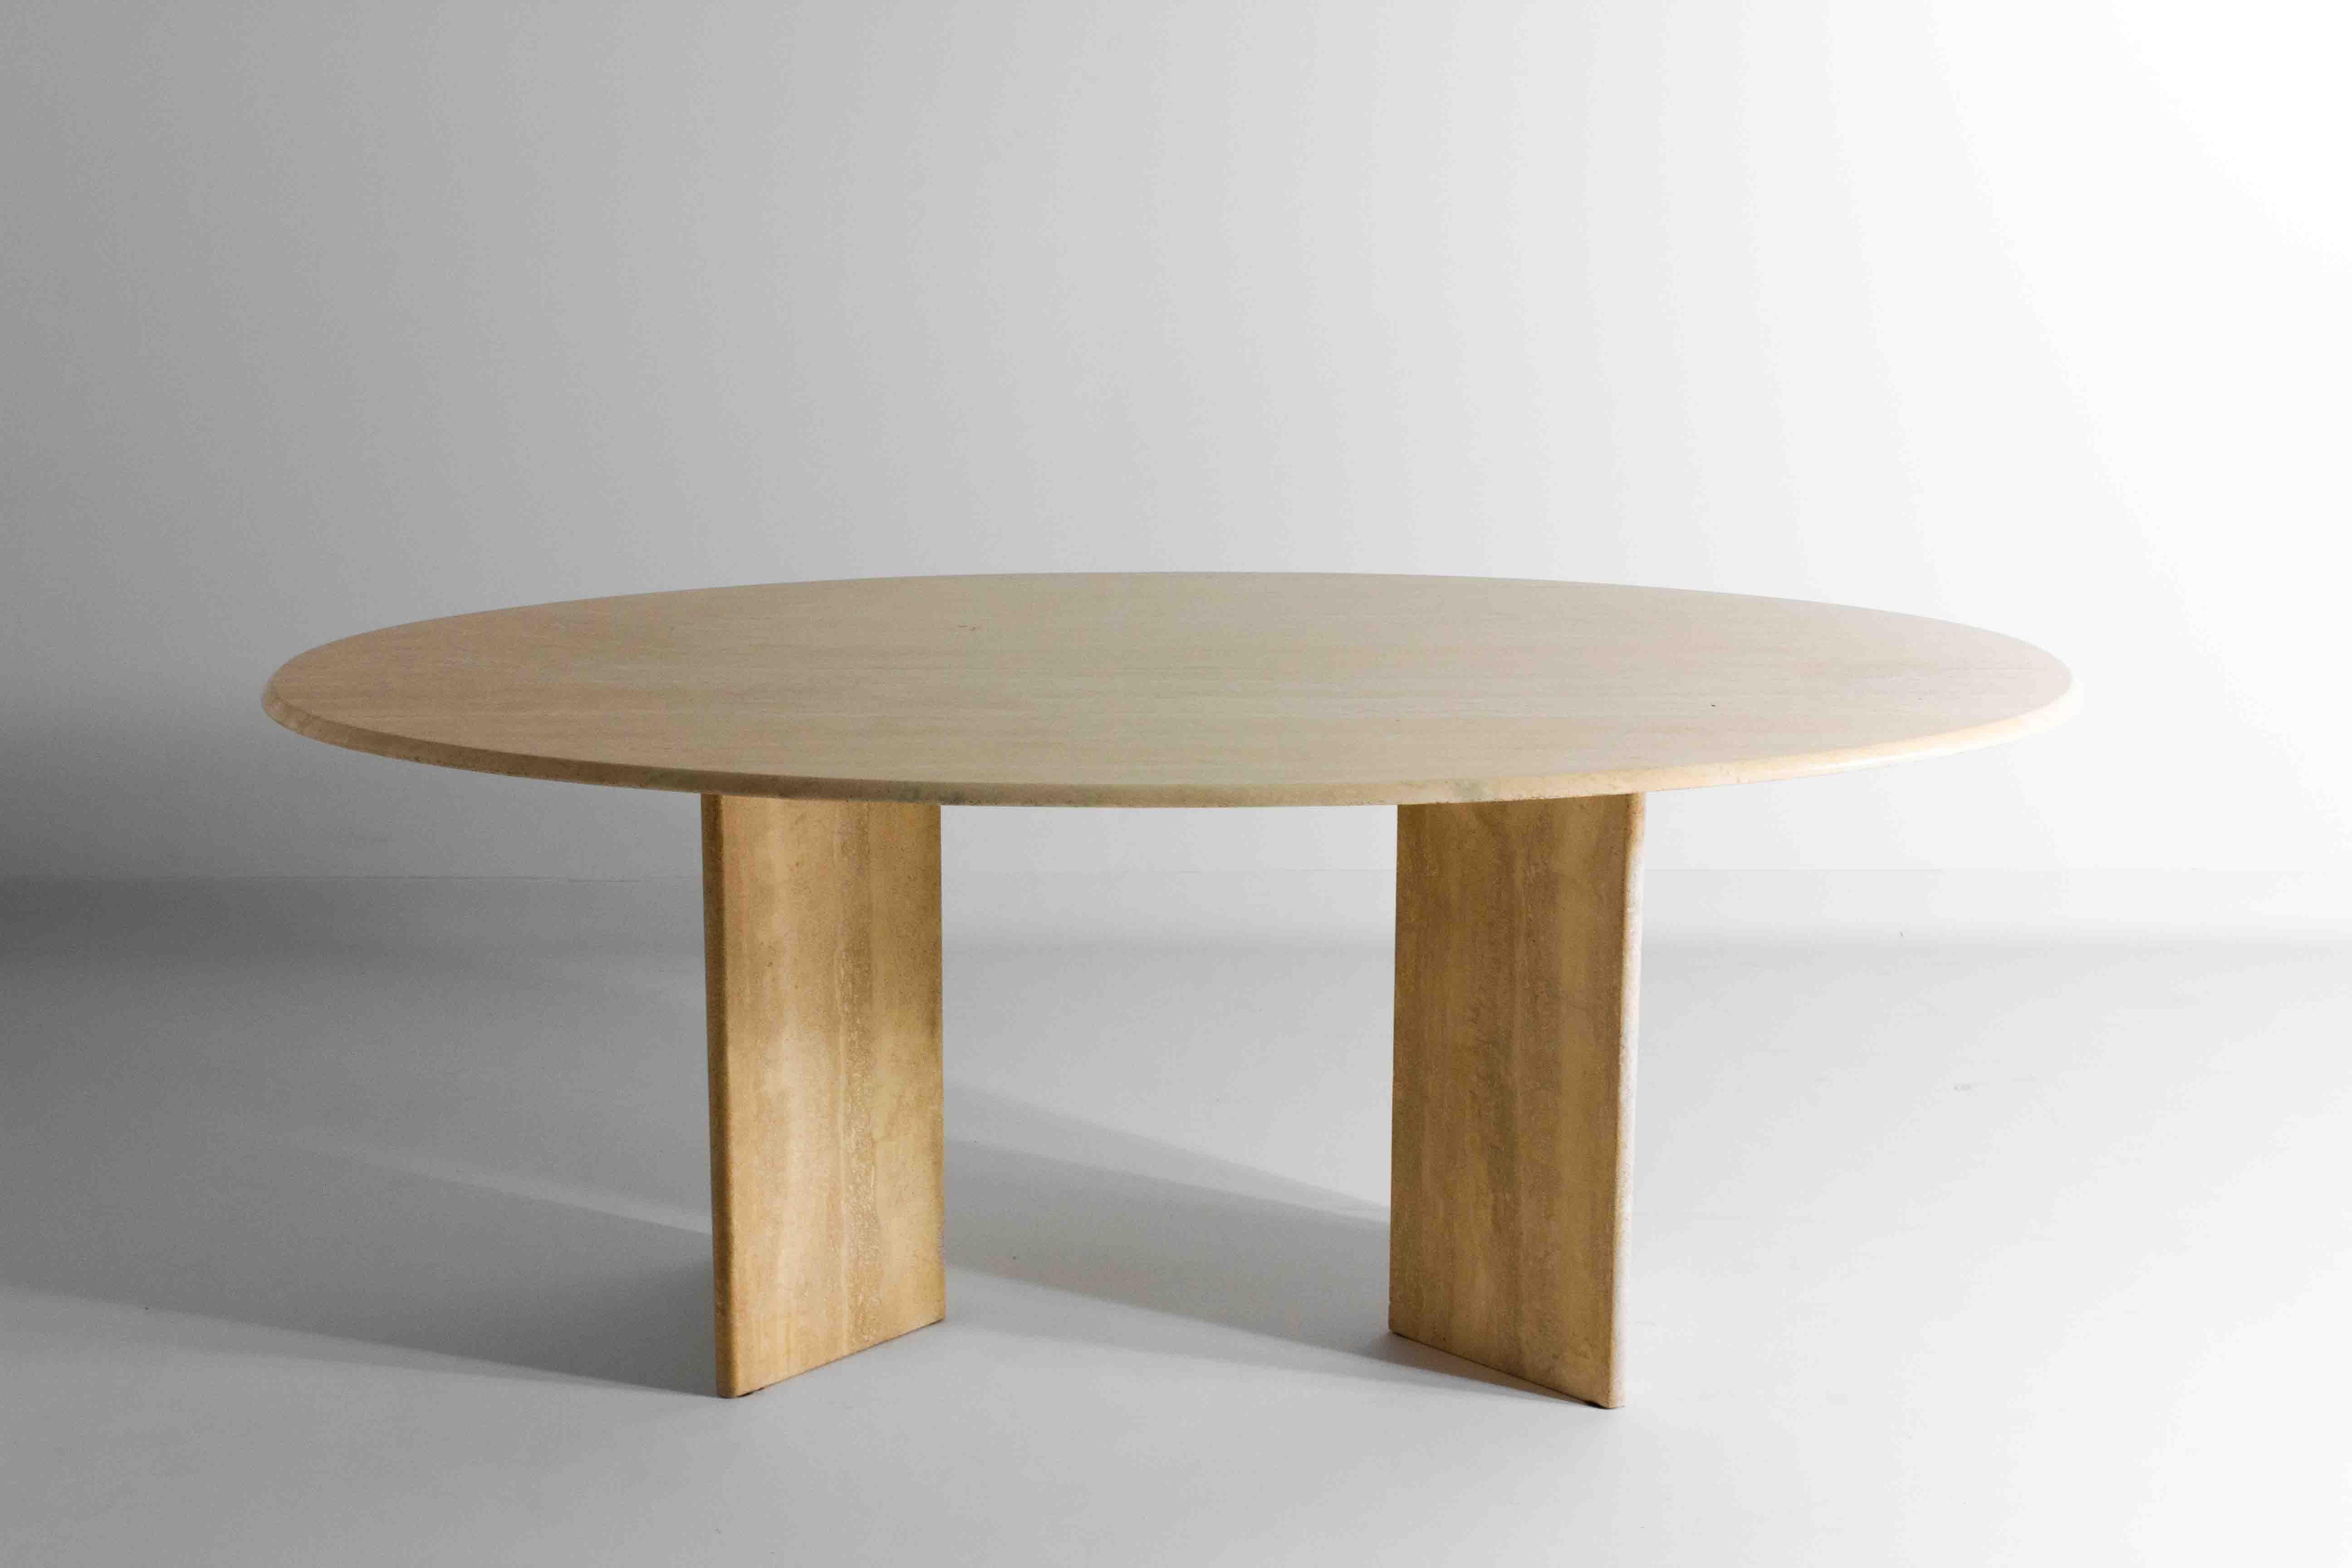 This 1970s Italian oval travertine dining table exudes a minimalist elegance with its smooth, clean lines and natural, light-toned stone construction. The table’s substantial oval top sits confidently on two robust, cornered feet which can be moved